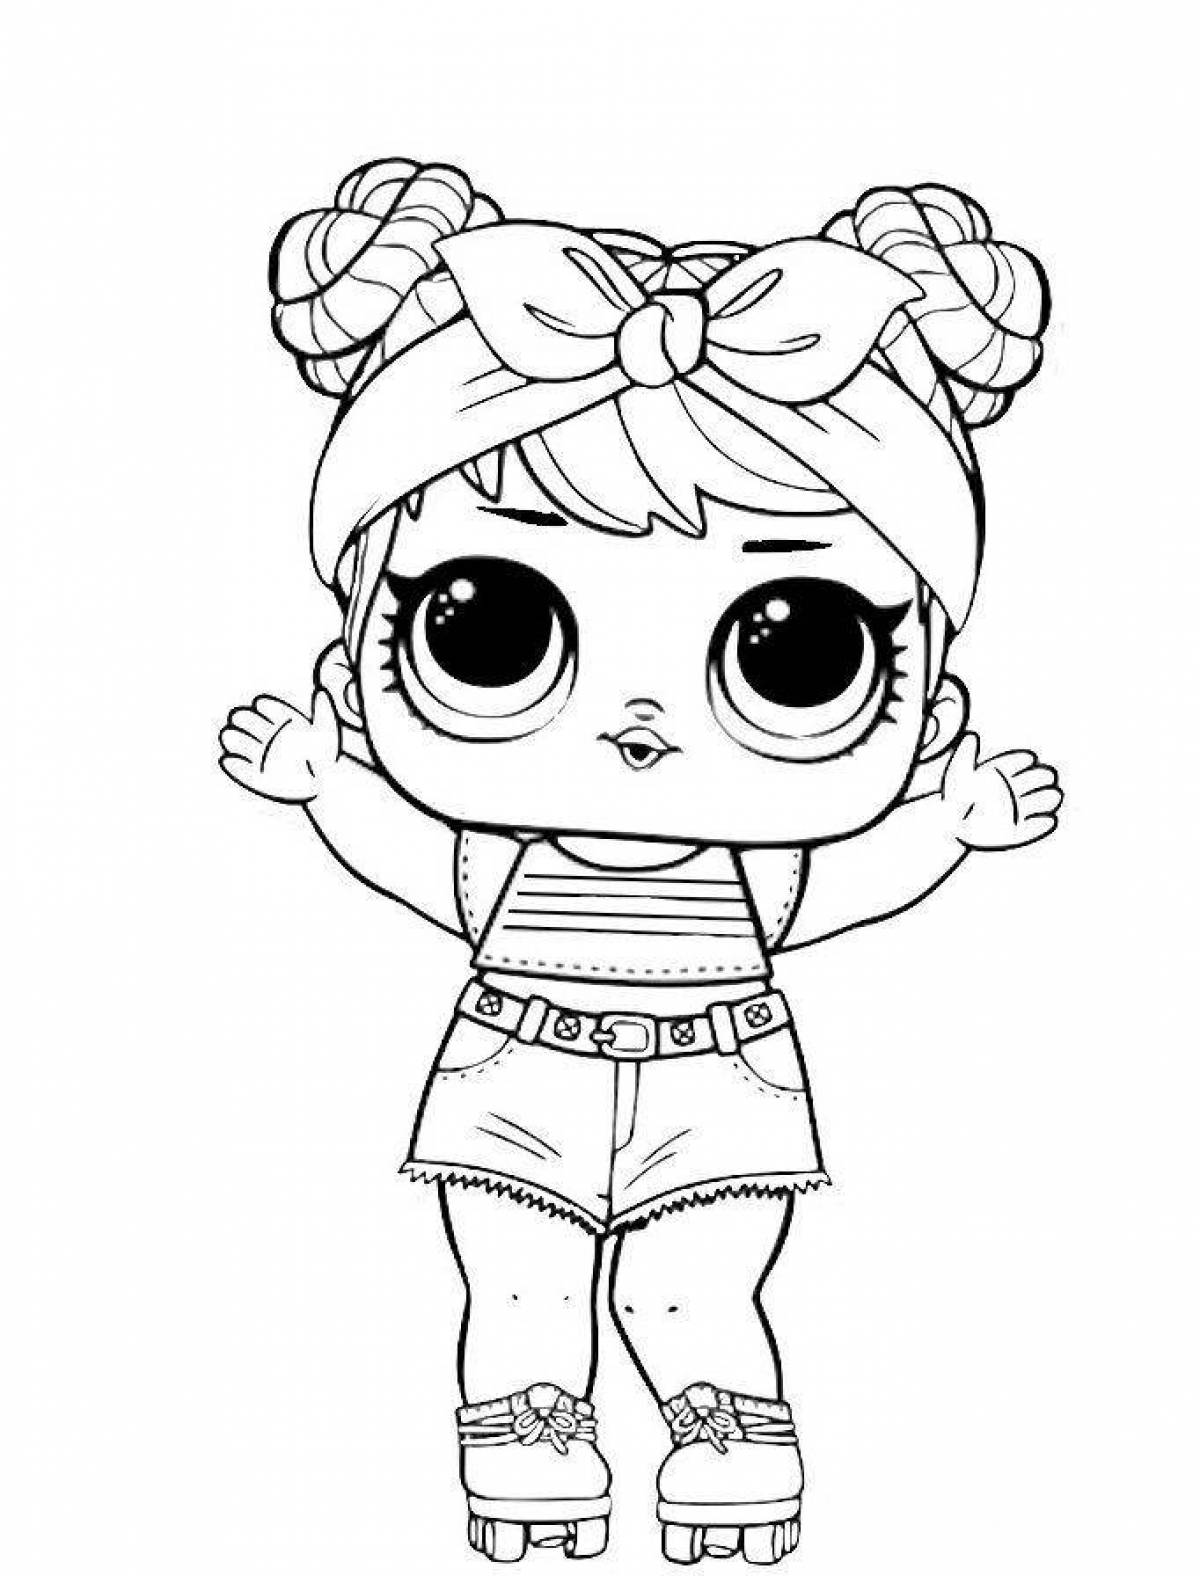 Color-frenzy coloring page lol doll